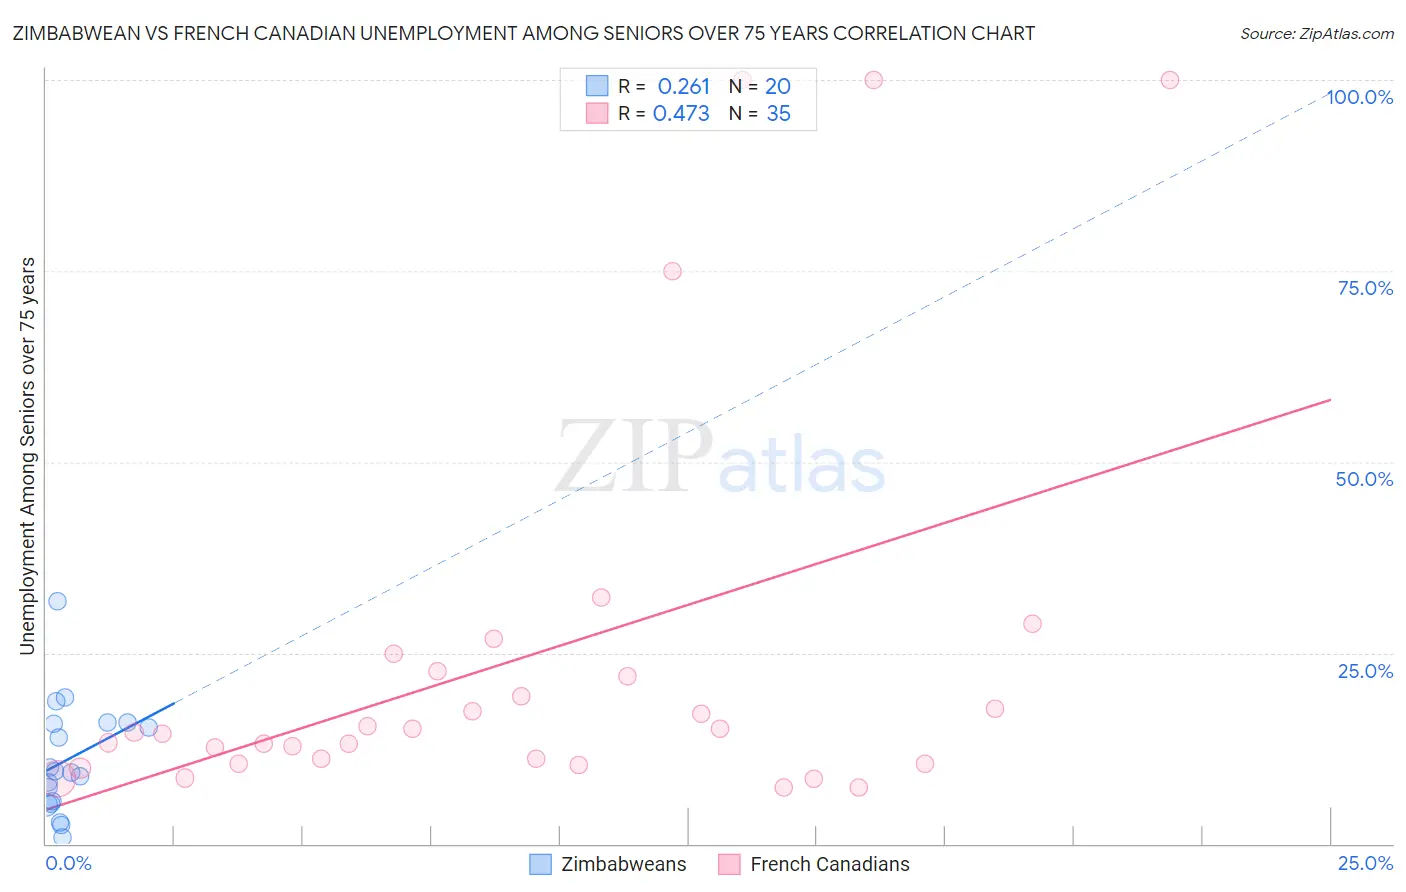 Zimbabwean vs French Canadian Unemployment Among Seniors over 75 years